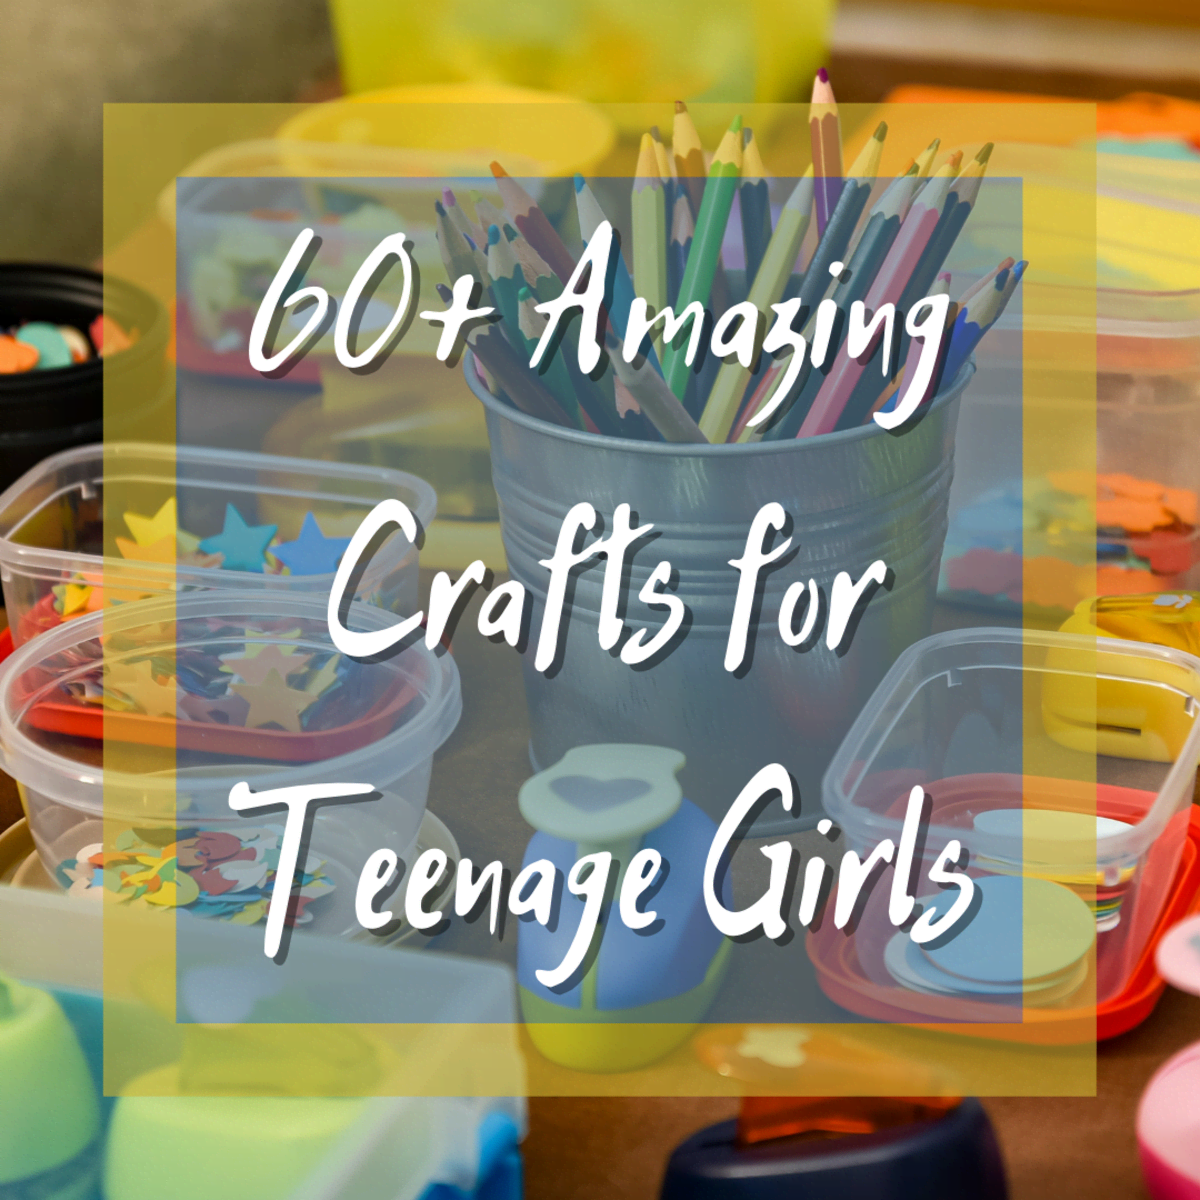 75+ Activities and Crafts for Teens & Tweens That Won't Get Eye Rolls,  Sighs, or Grunts - Intentional Family Life